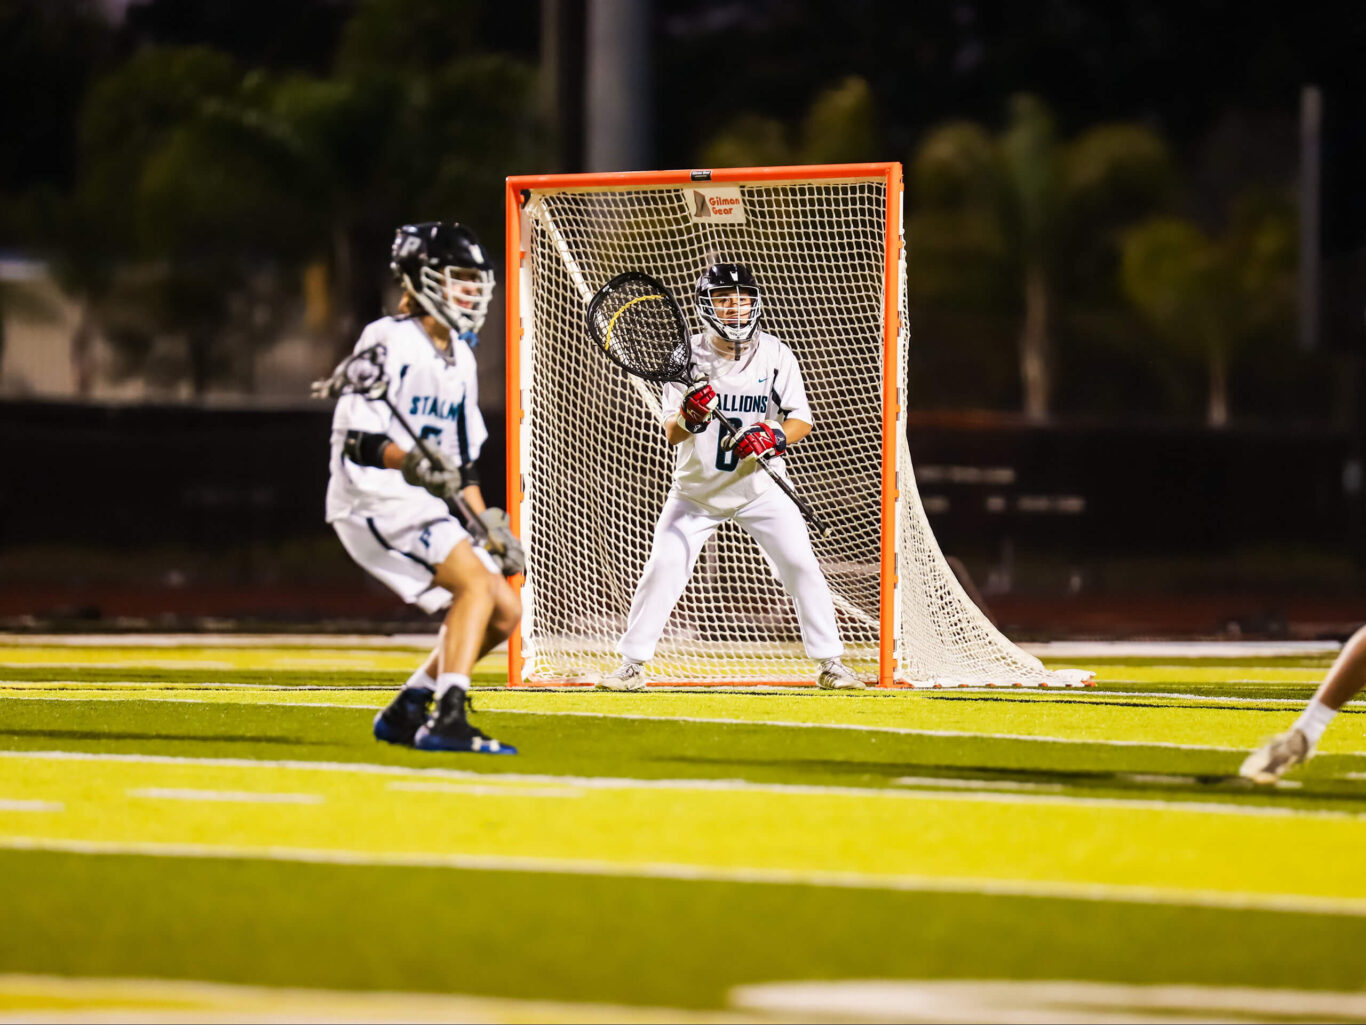 A boys lacrosse player in action on a field.